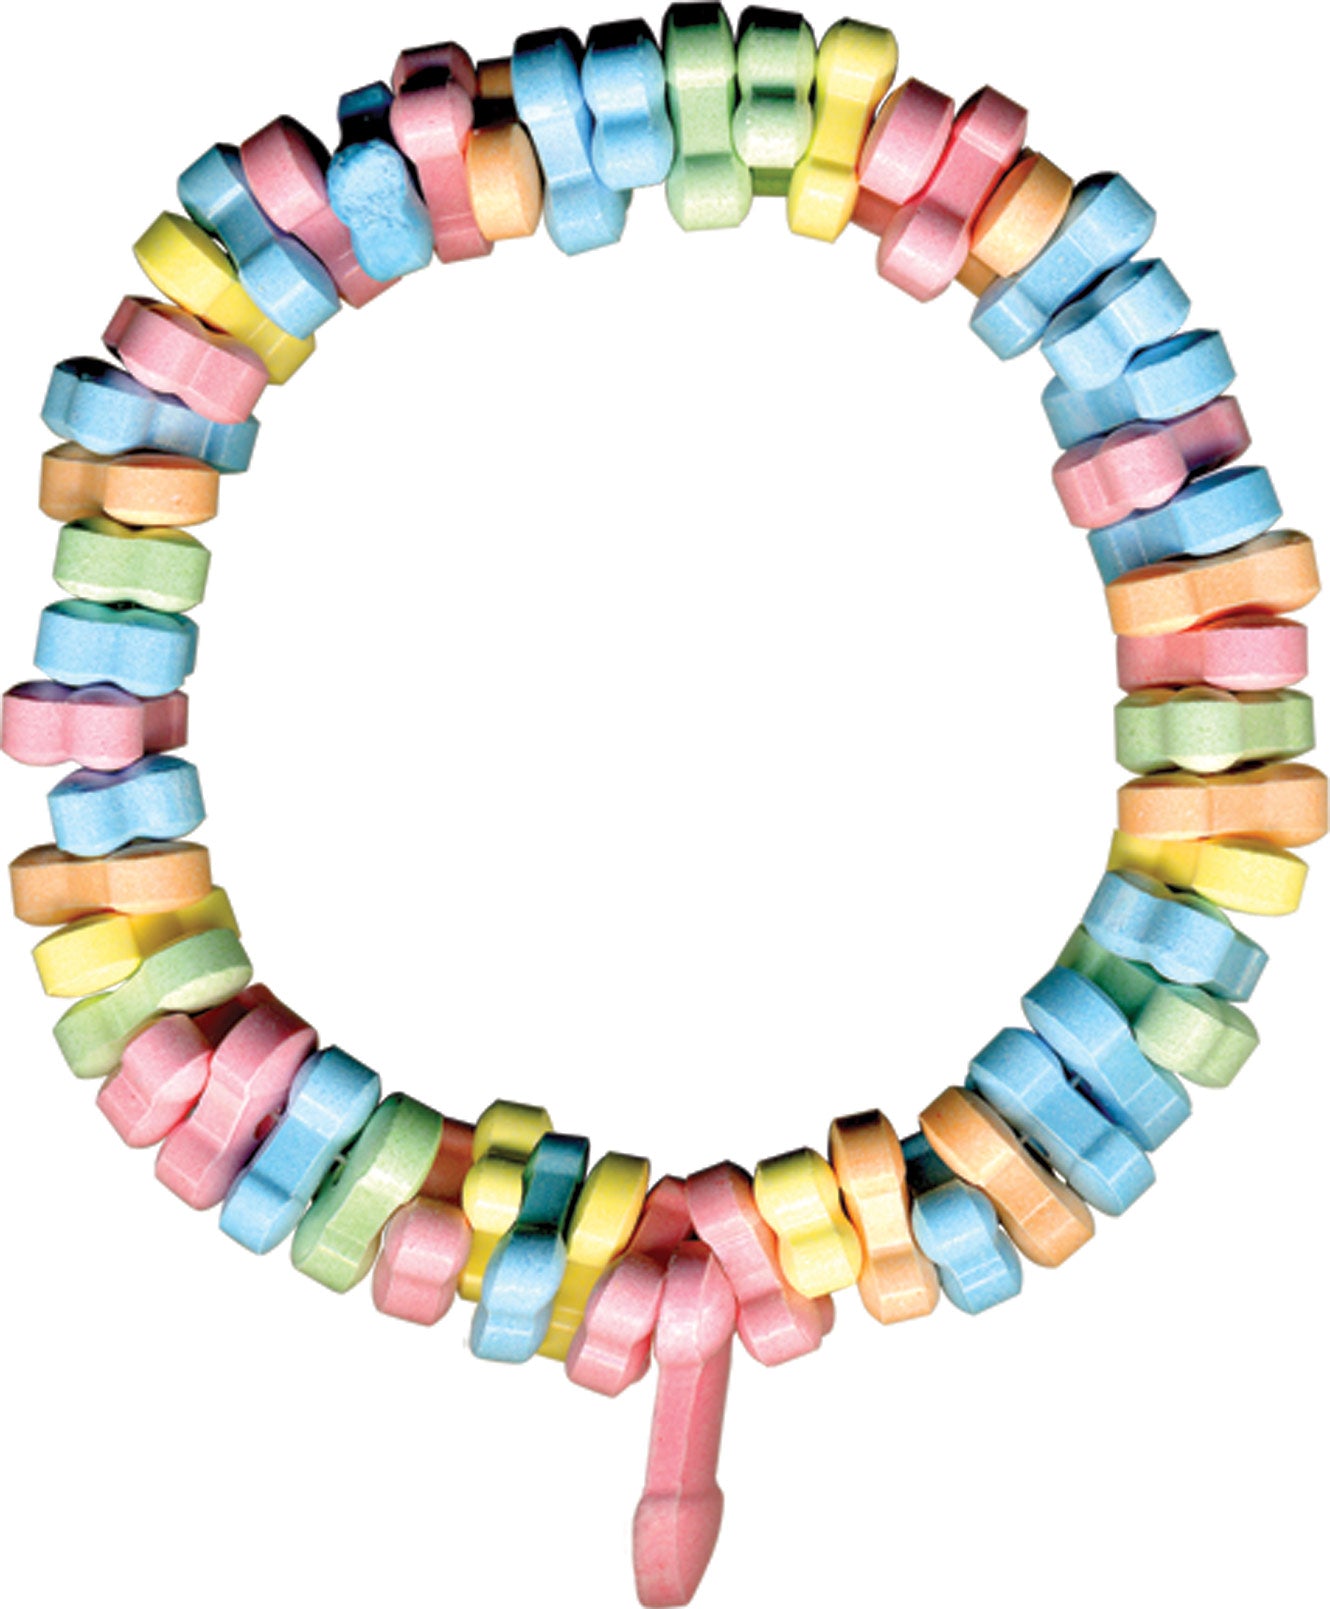 Introducing Dicky Charms Penis Shaped Candy Necklace